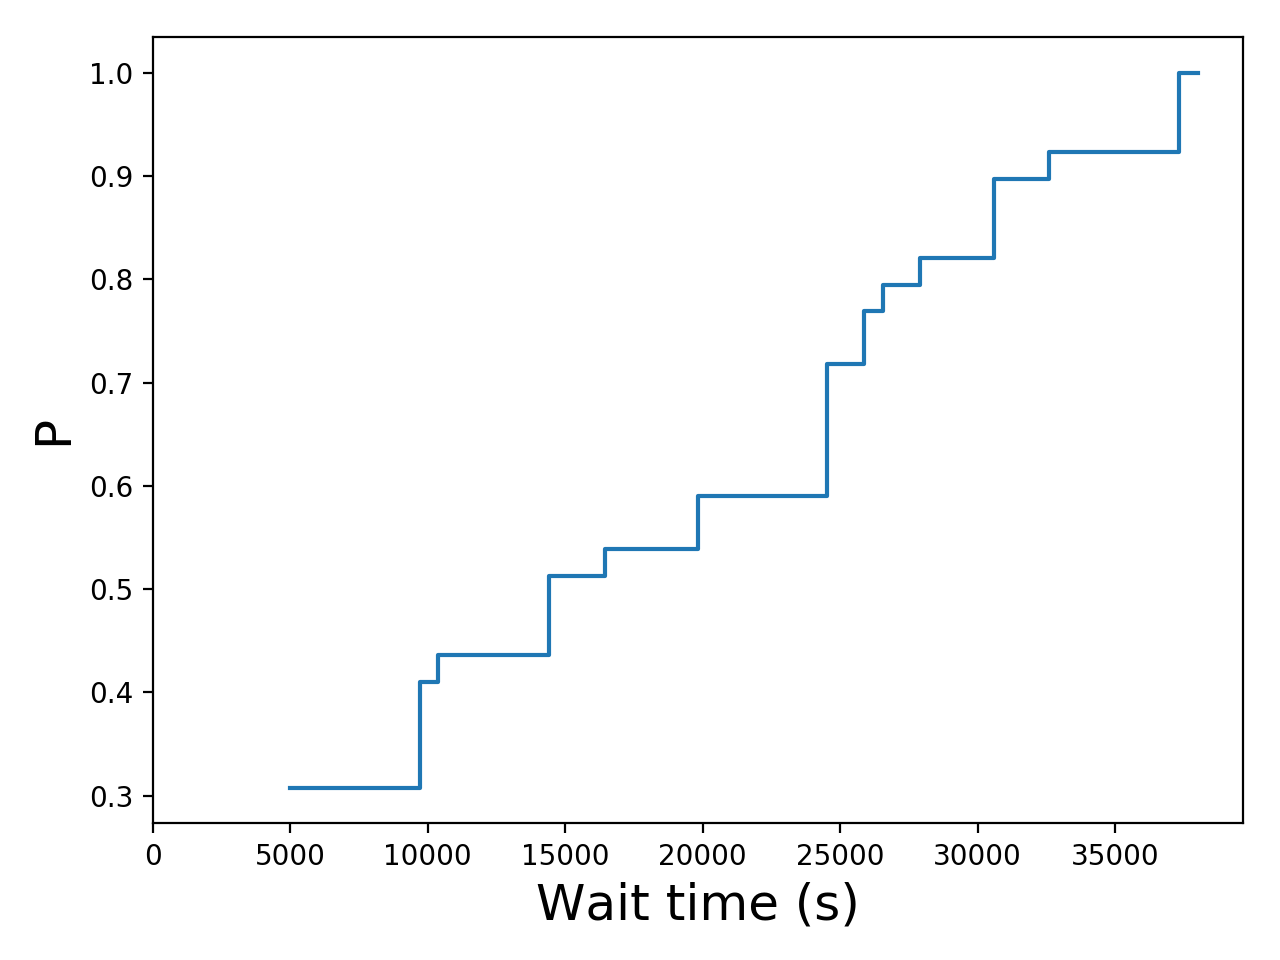 Task wait time CDF graph for the Pegasus_P8 trace.